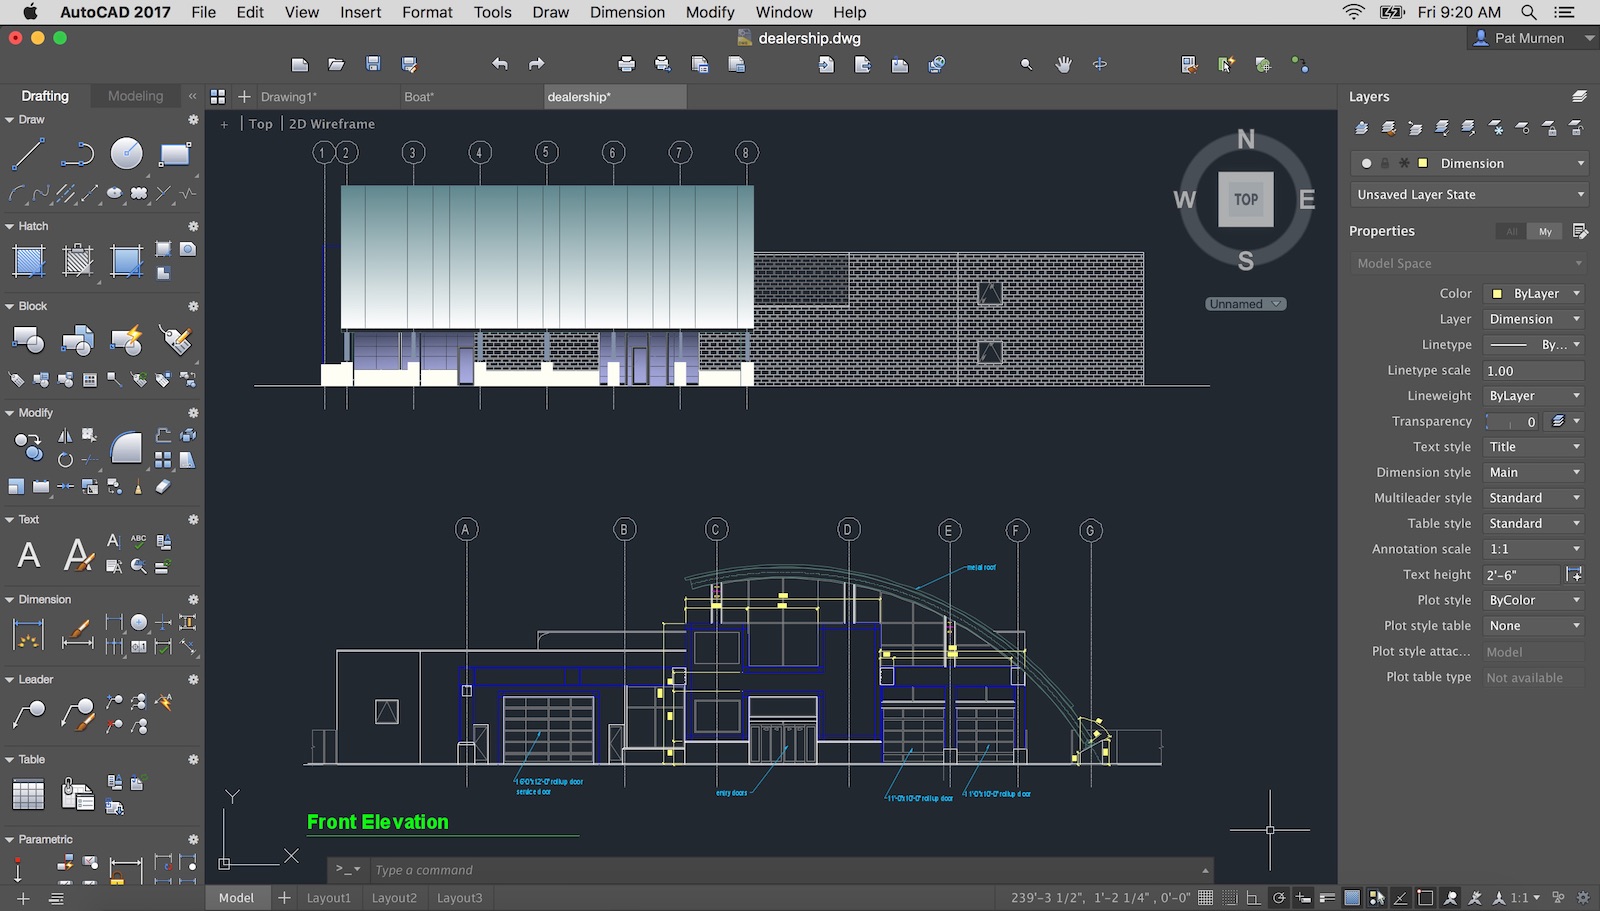 Autodesk Announces New AutoCAD 2017 for Mac and AutoCAD LT for Mac